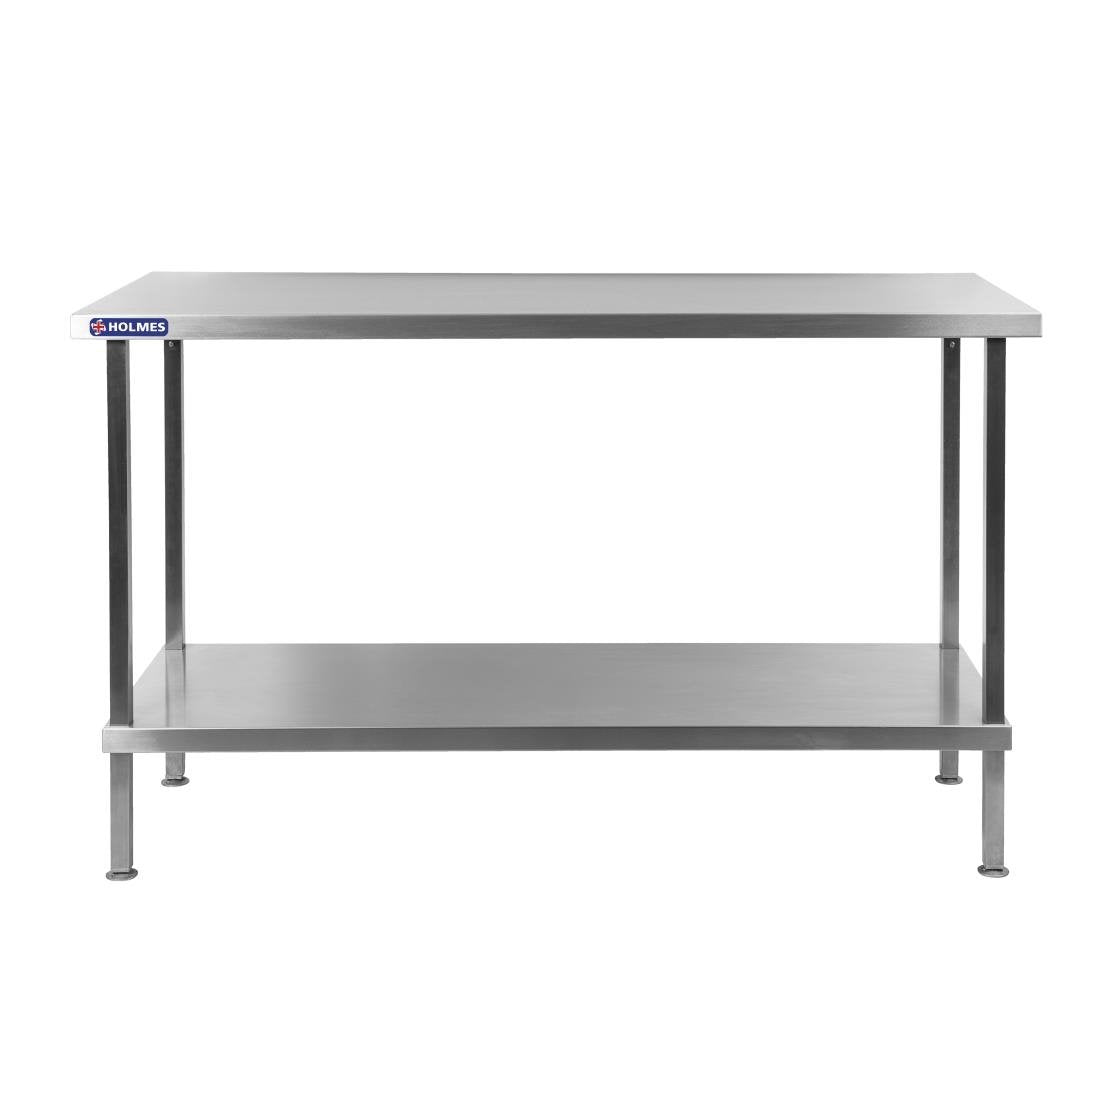 DR050 Holmes Stainless Steel Centre Table 1200mm JD Catering Equipment Solutions Ltd